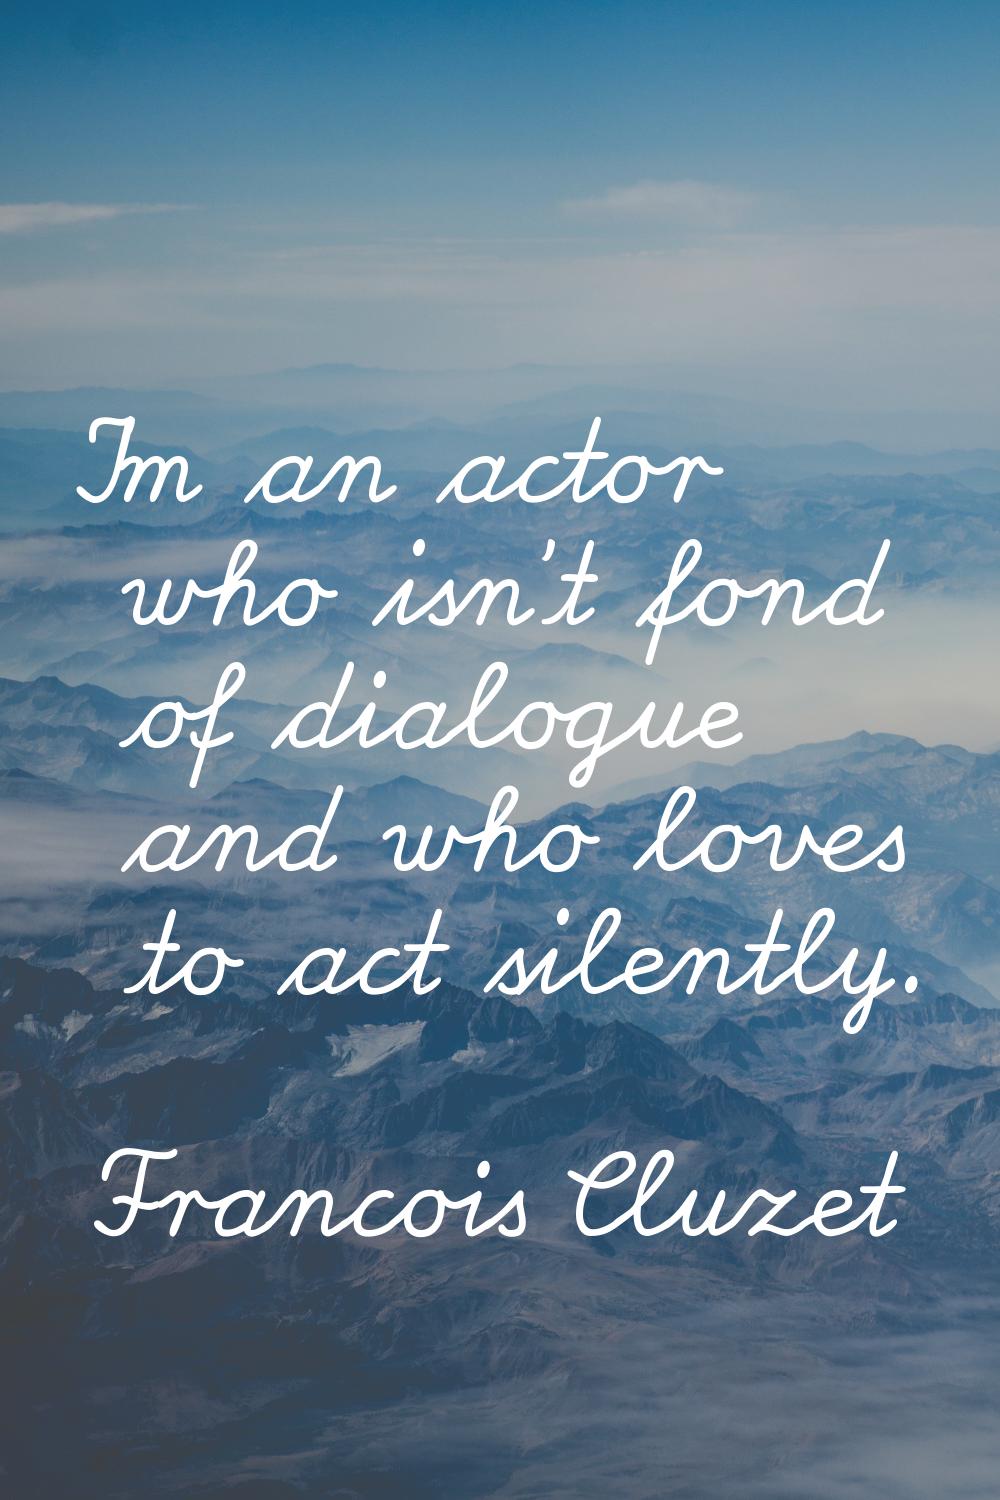 I'm an actor who isn't fond of dialogue and who loves to act silently.